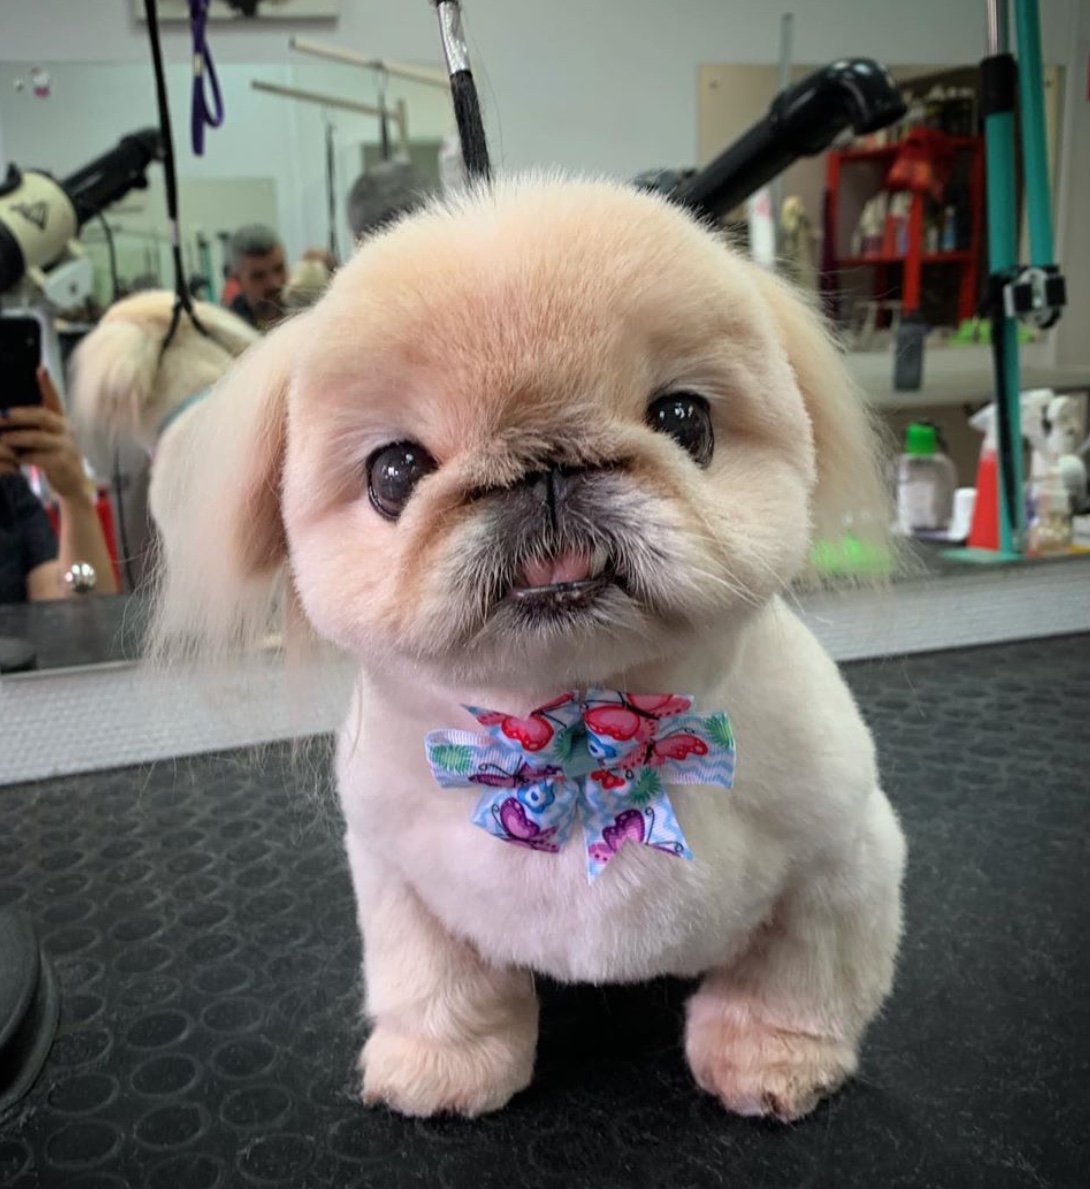 A Pekingese wearing a floral bow tie sitting on top of the grooming table